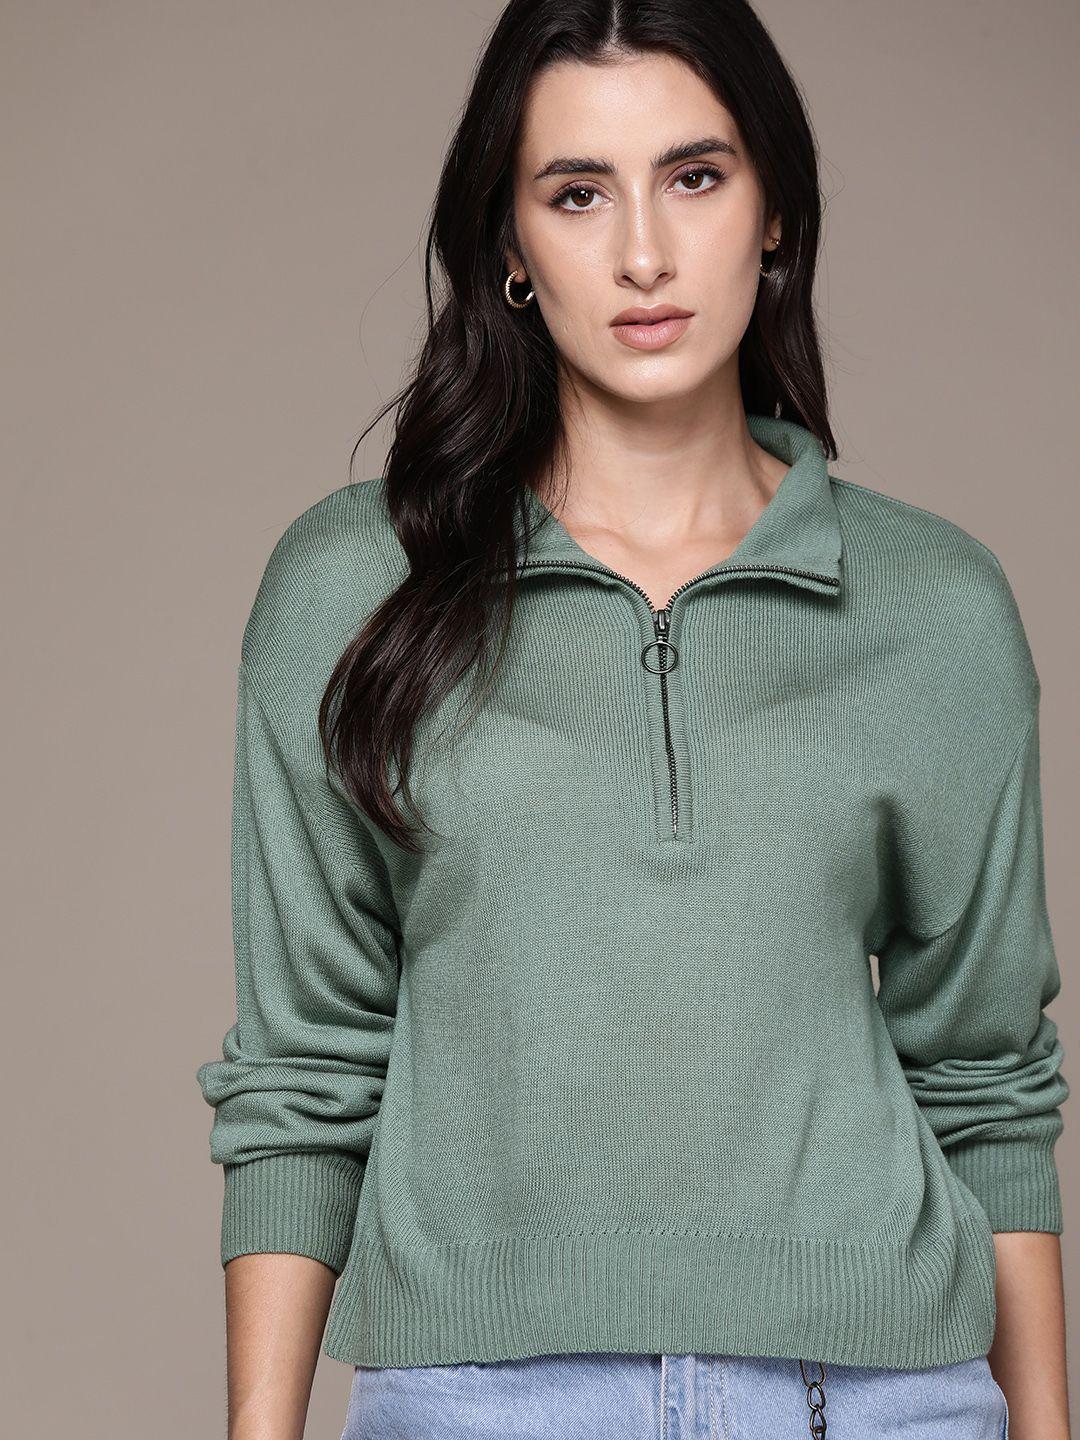 the roadster lifestyle co. mock collar acrylic pullover